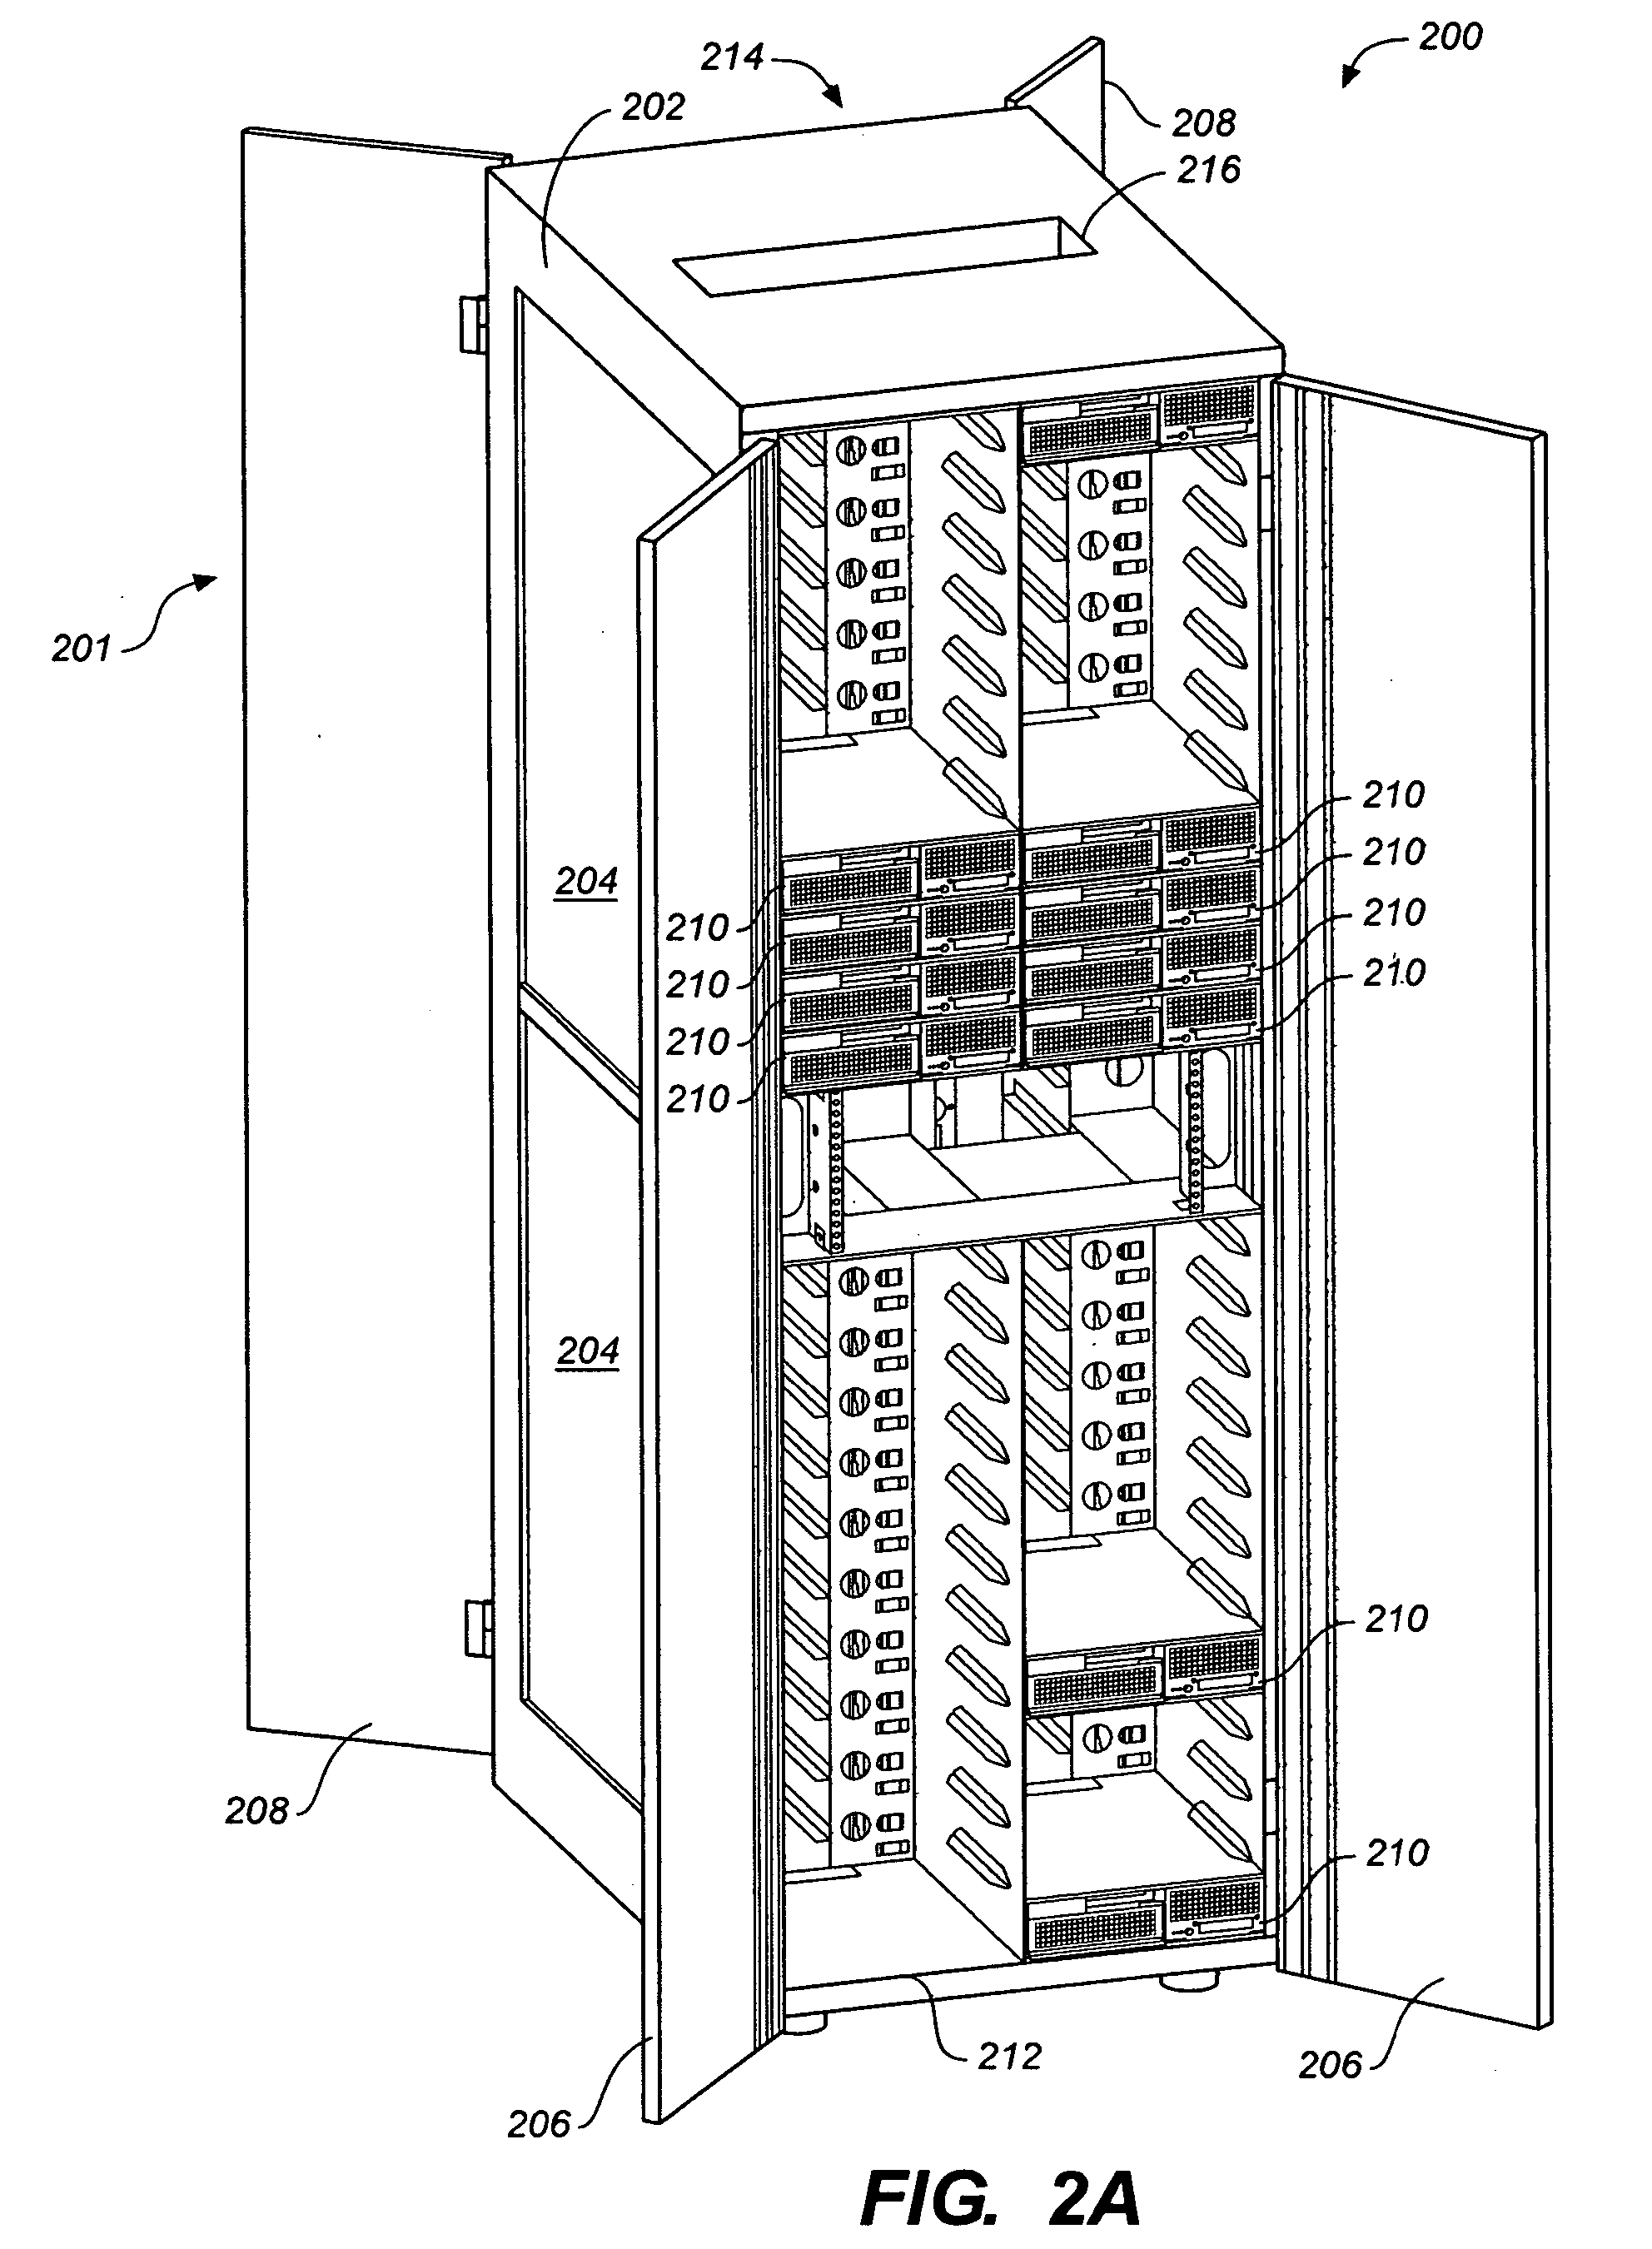 Rack mounted computer system